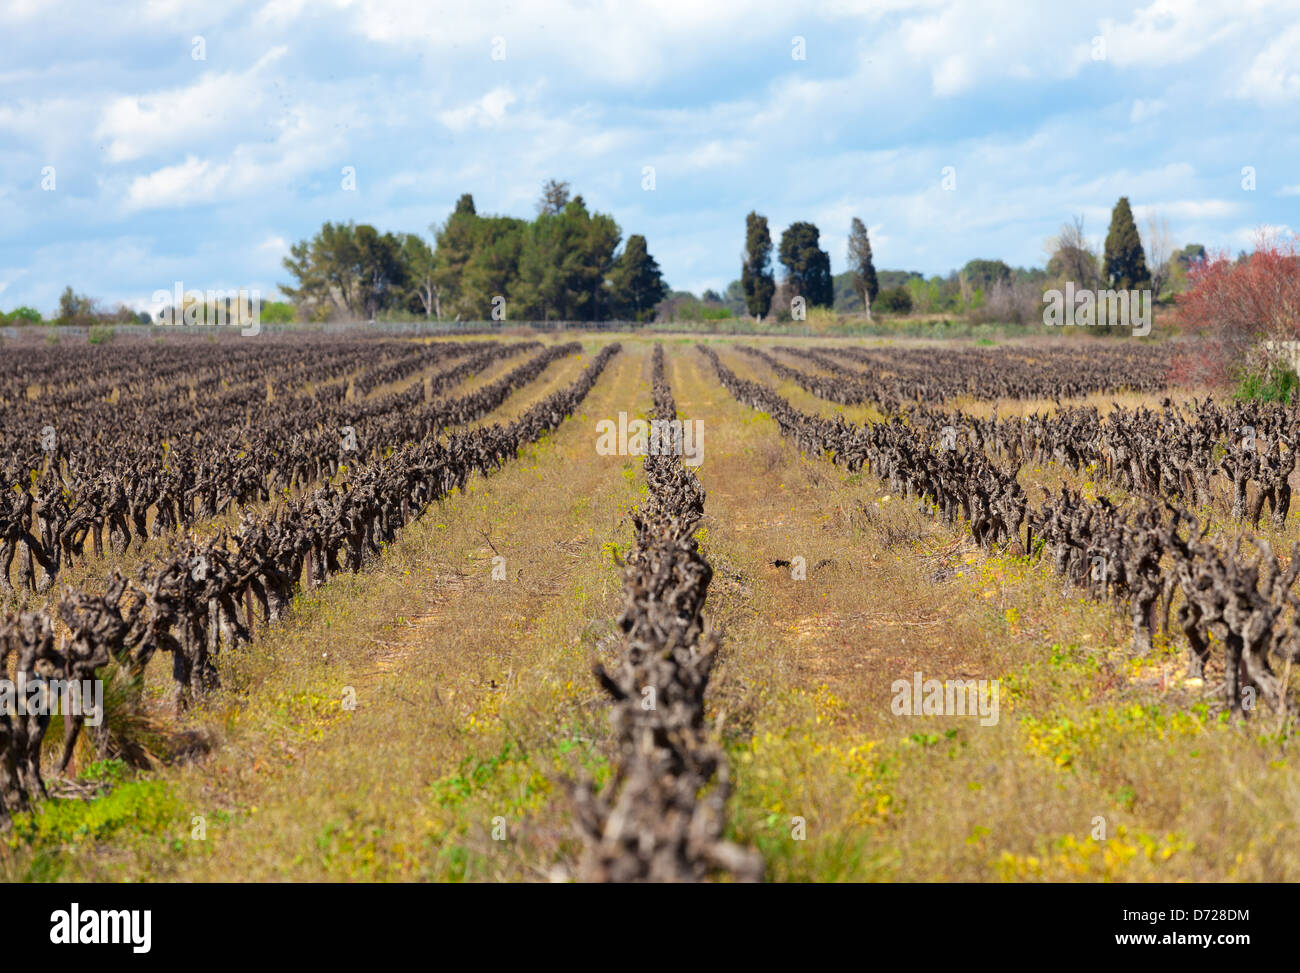 Photograph of a dry vinyard with beautiful surroundings Stock Photo